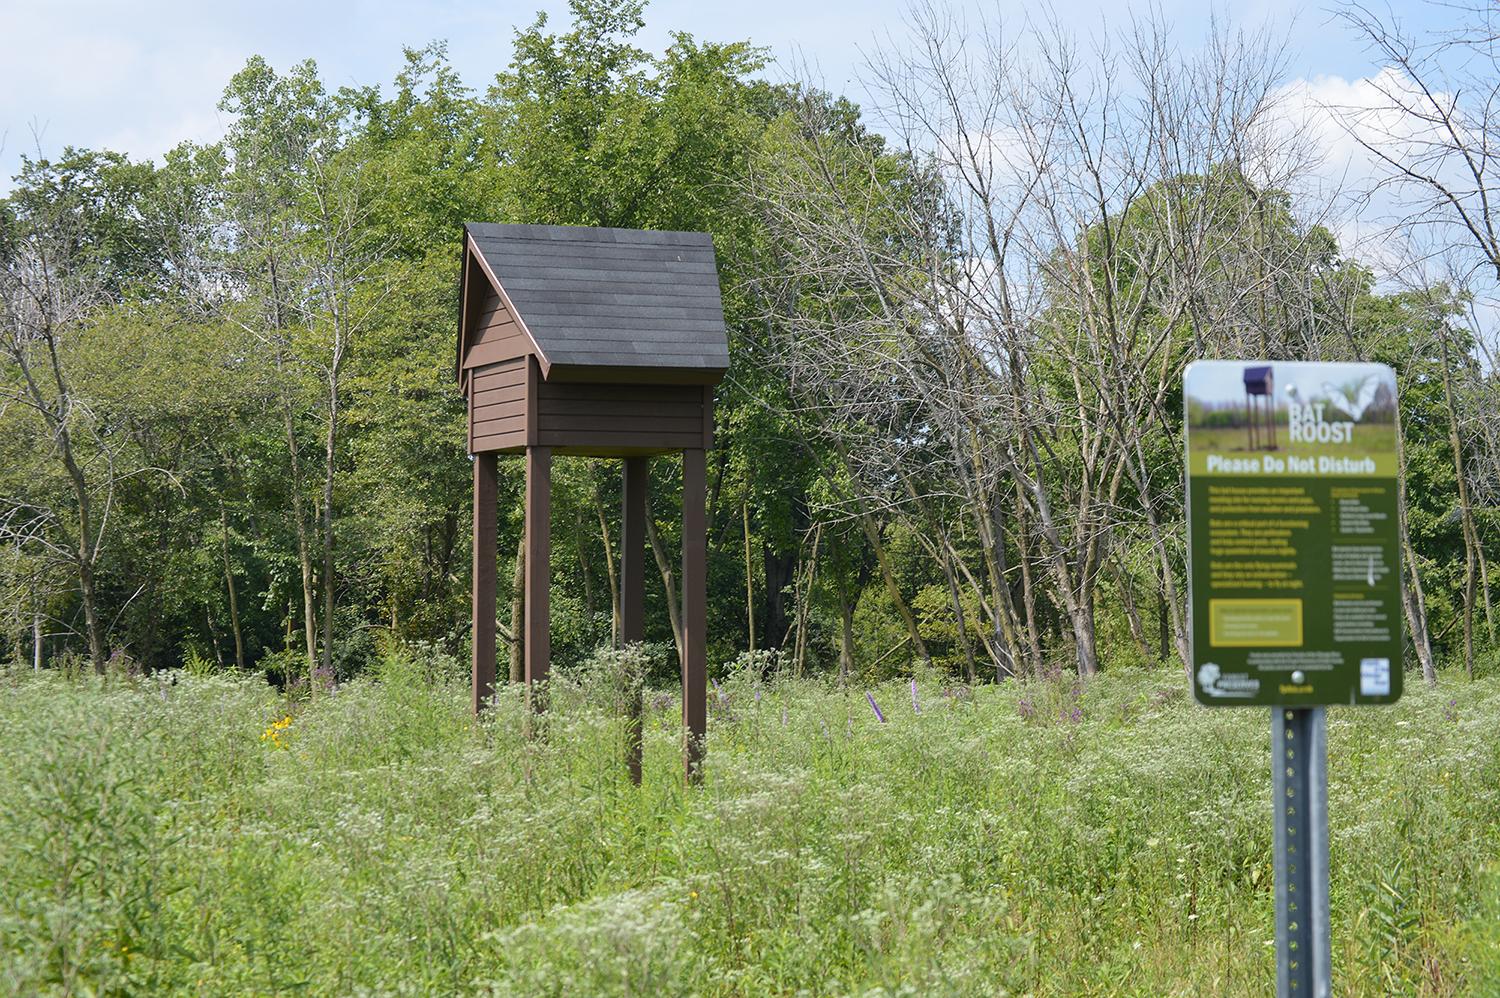 Conservationists have installed six bat houses in Cook County since 2015 to provide safe maternity colonies where female bats can give birth and nurse their pups. (Courtesy Friends of the Chicago River)